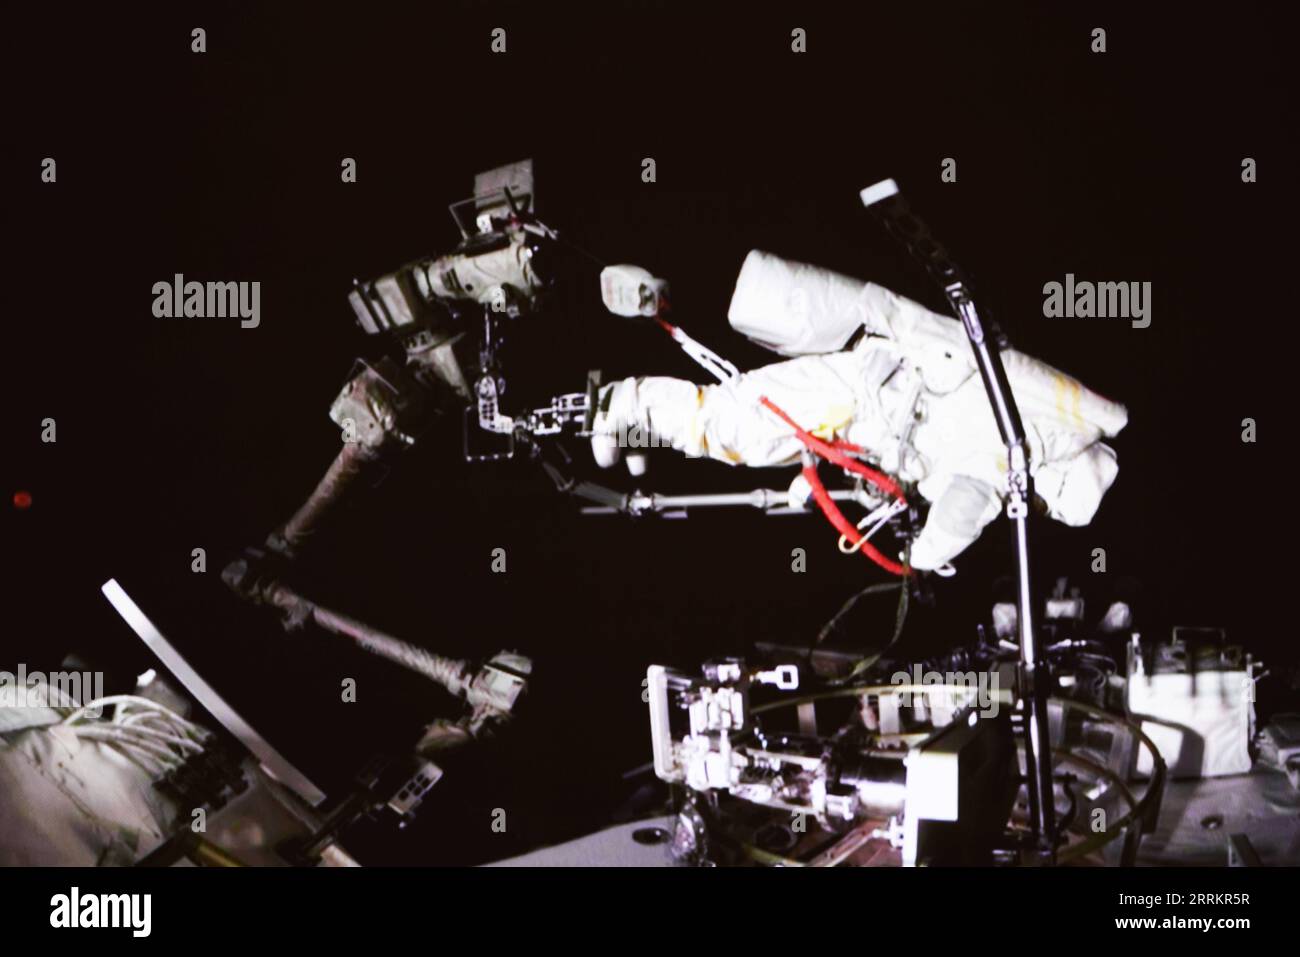 220917 -- BEIJING, Sept. 17, 2022 -- Screen image captured at Beijing Aerospace Control Center on Sept. 17, 2022 shows Shenzhou-14 astronaut Cai Xuzhe conducting extravehicular activities EVAs. China s Shenzhou-14 astronauts Cai Xuzhe and Chen Dong successfully exited the space station lab module Wentian on Saturday to conduct EVAs, according to the China Manned Space Agency CMSA.  EyesonSciCHINA-WENTIAN-SHENZHOU-14 ASTRONAUTS-EXTRAVEHICULAR ACTIVITIES CN GuoxZhongzheng PUBLICATIONxNOTxINxCHN Stock Photo